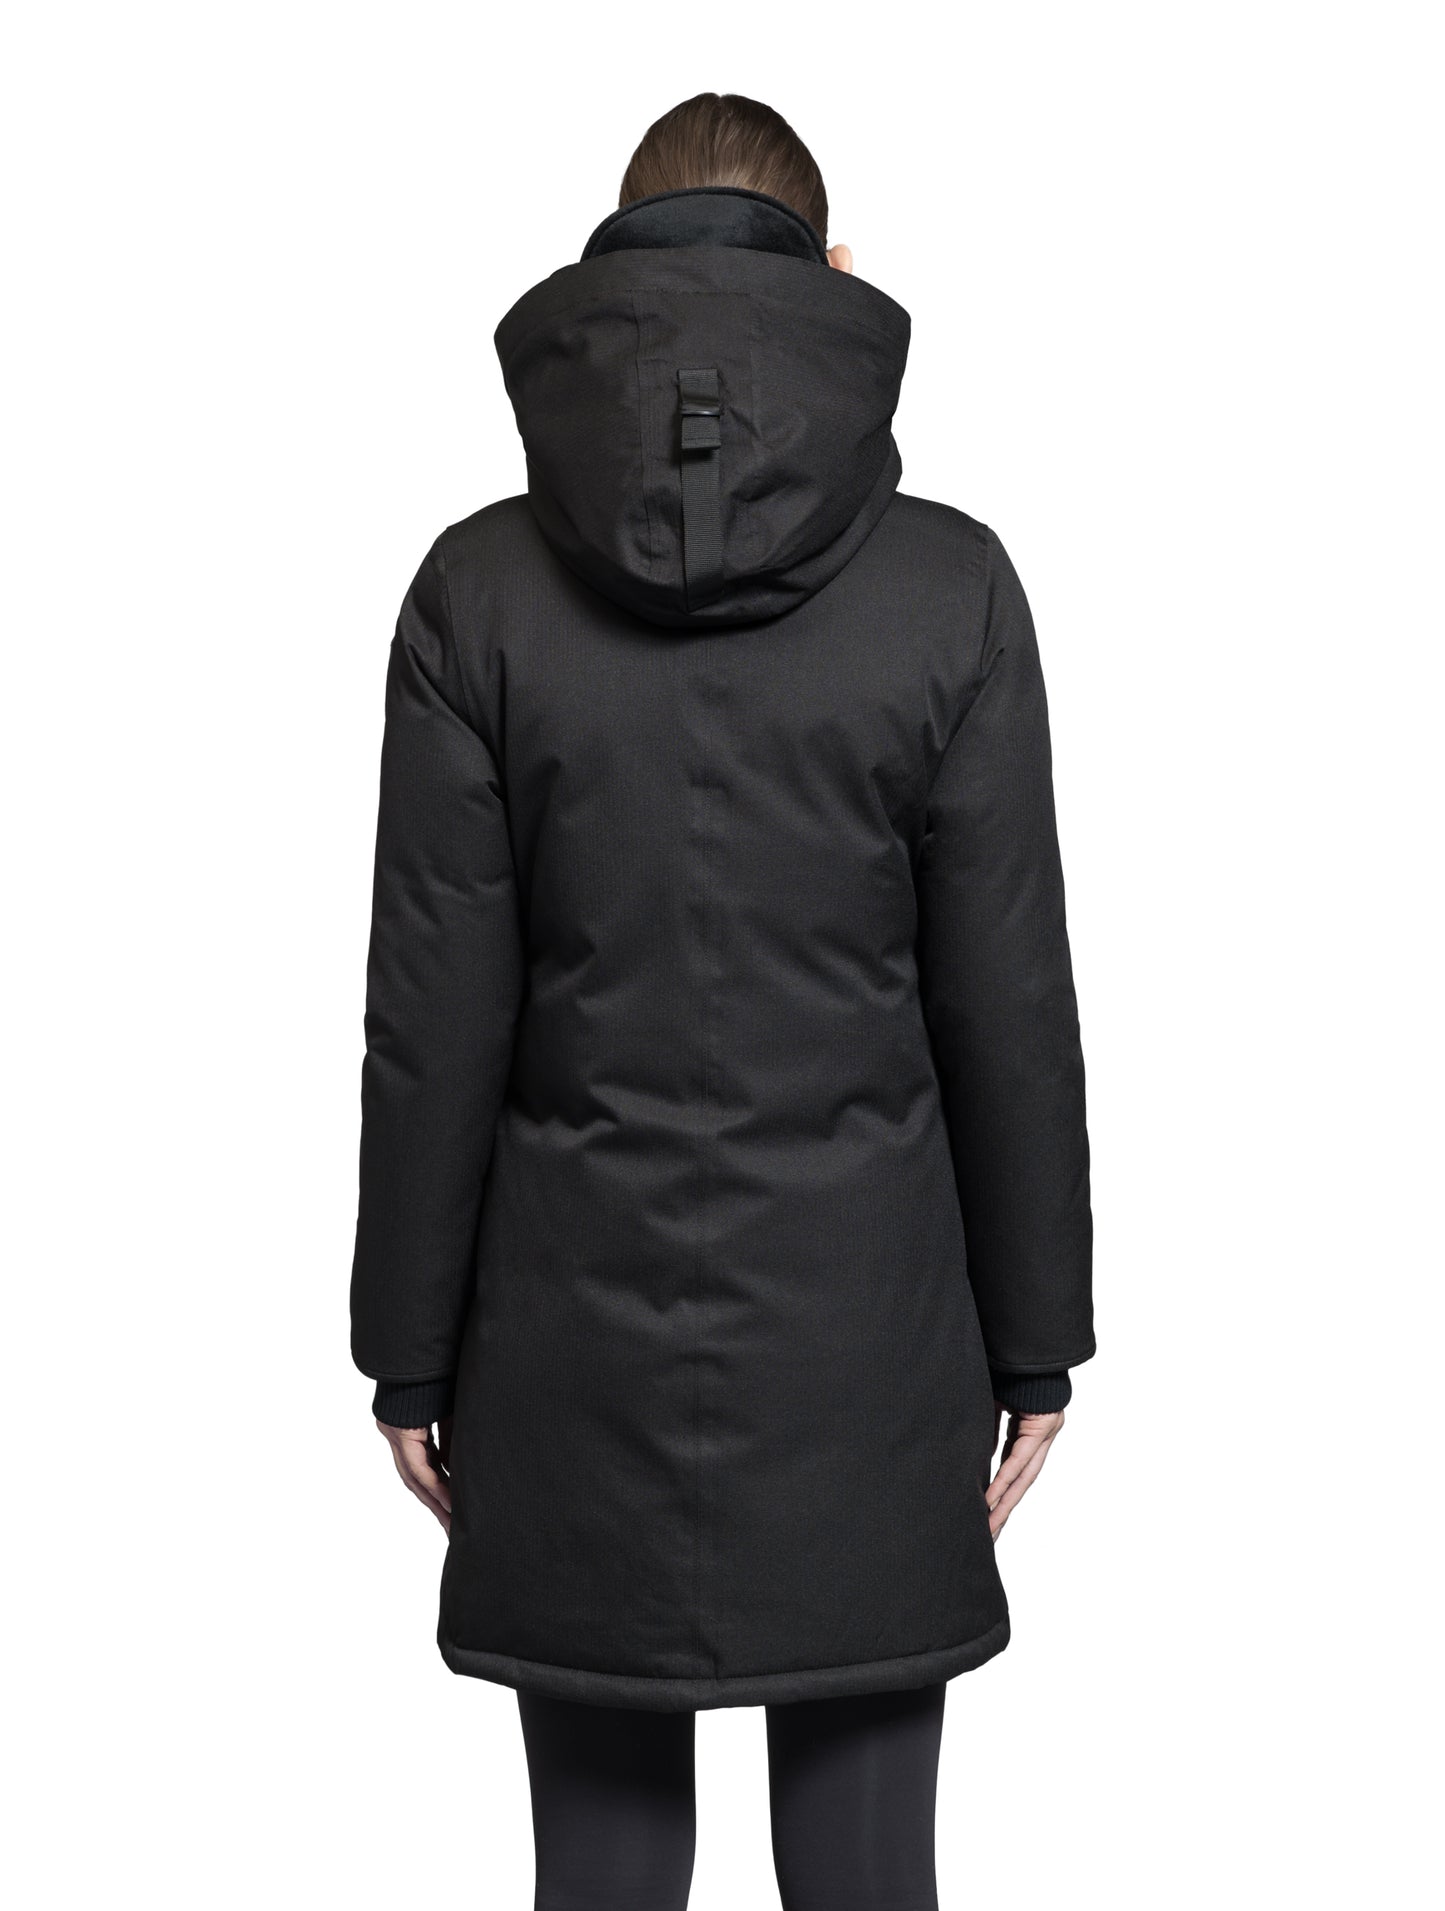 Merideth Furless Ladies Parka in thigh length, Canadian white duck down insulation, removable down-filled hood, centre-front two-way zipper with magnetic wind flap closure, four exterior pockets, and elastic ribbed cuffs, in Black